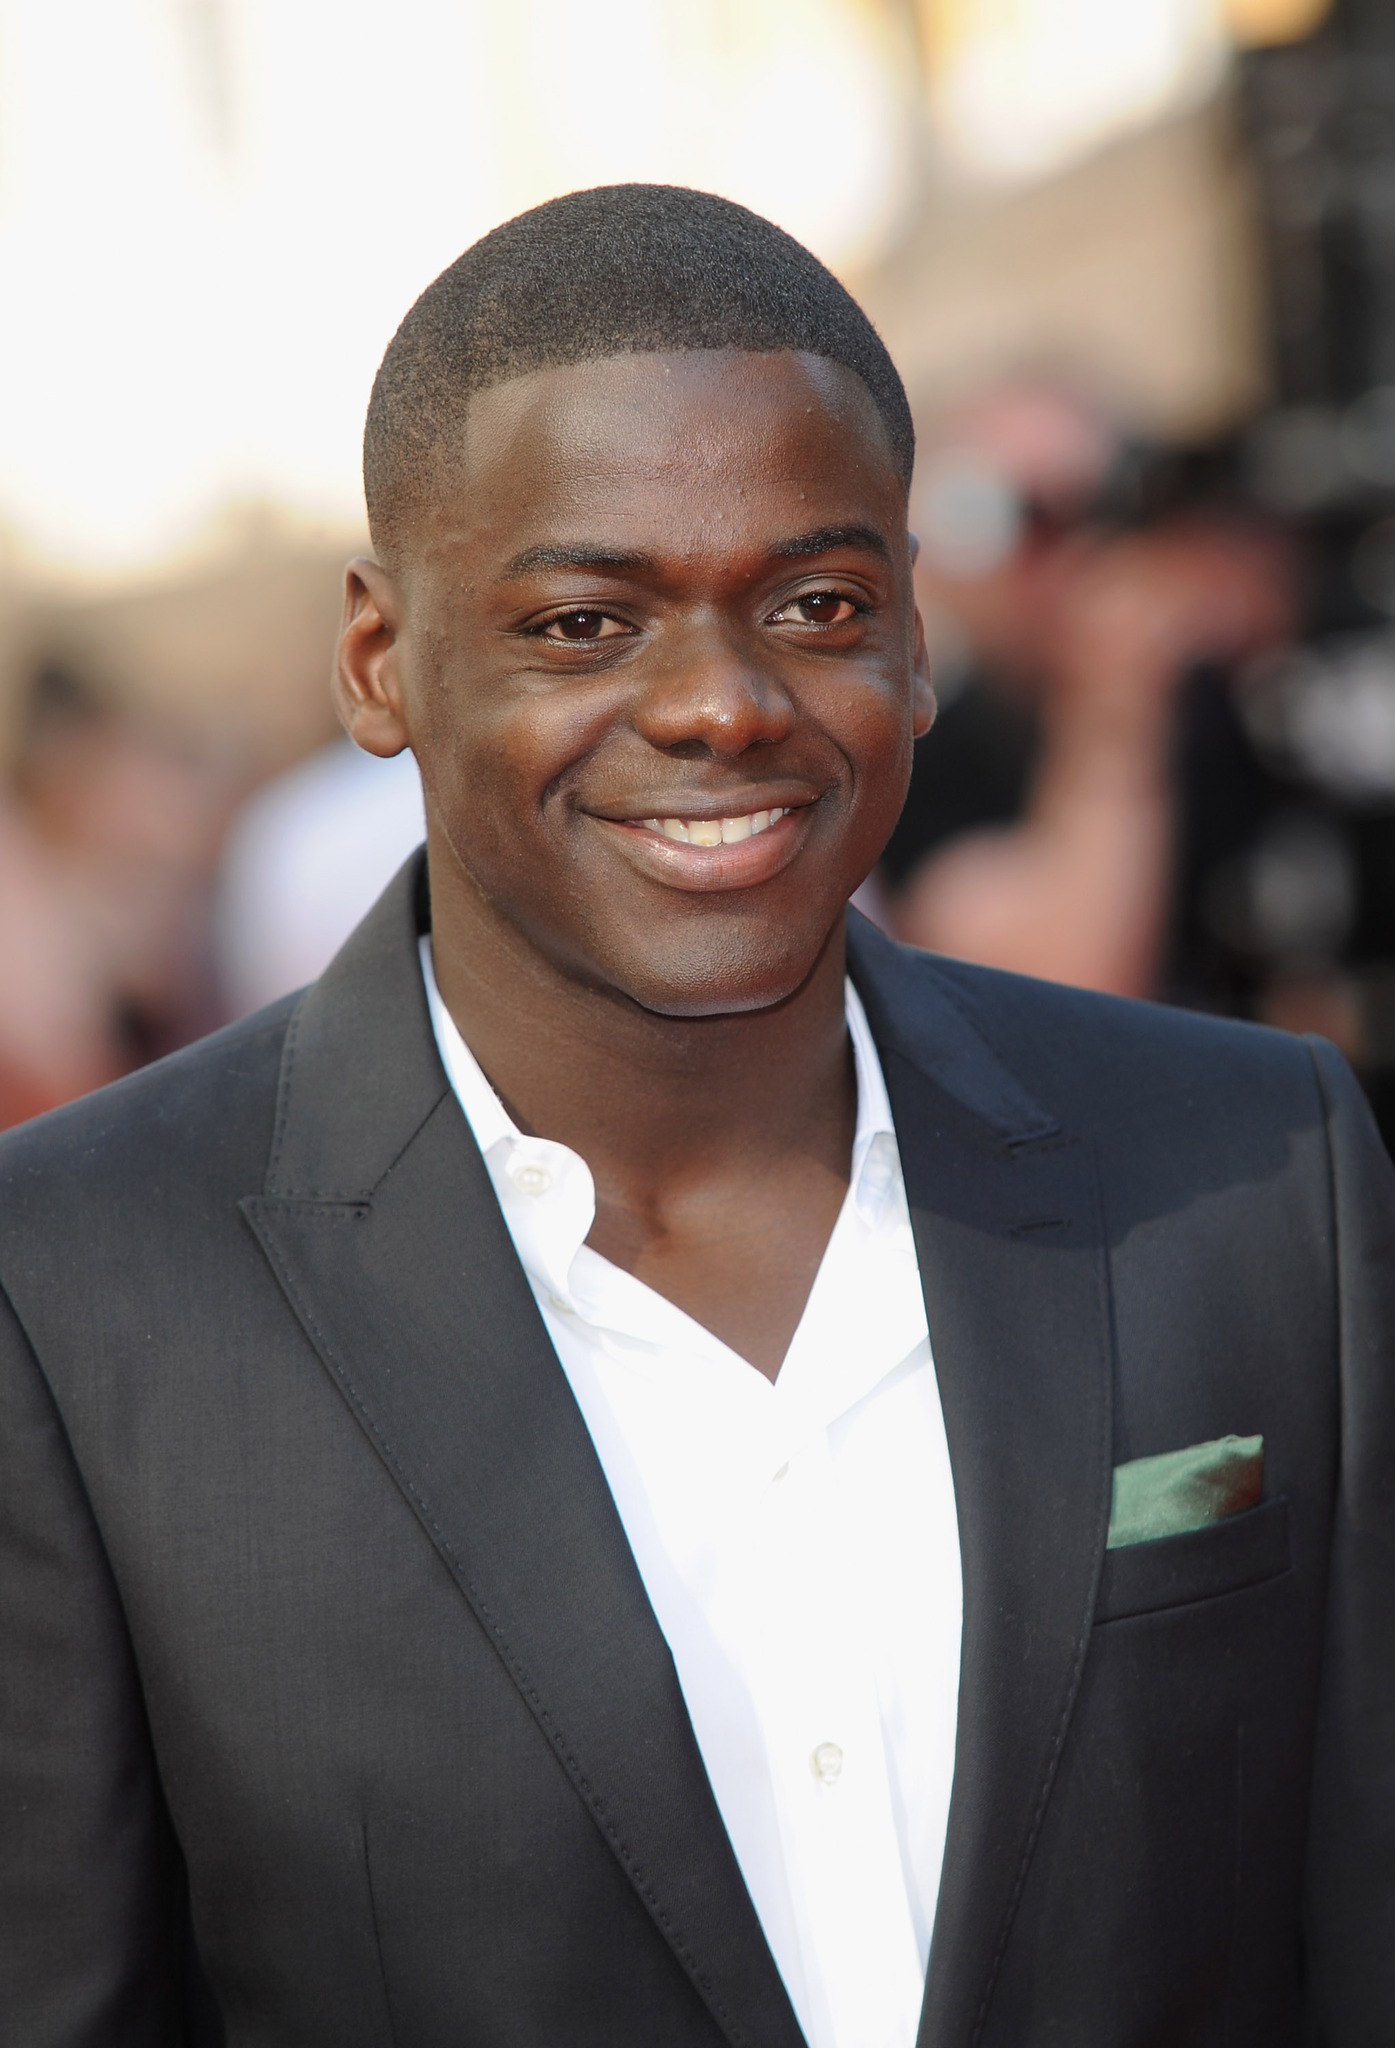 30 Interesting Things Most People Don’t Know About Daniel Kaluuya